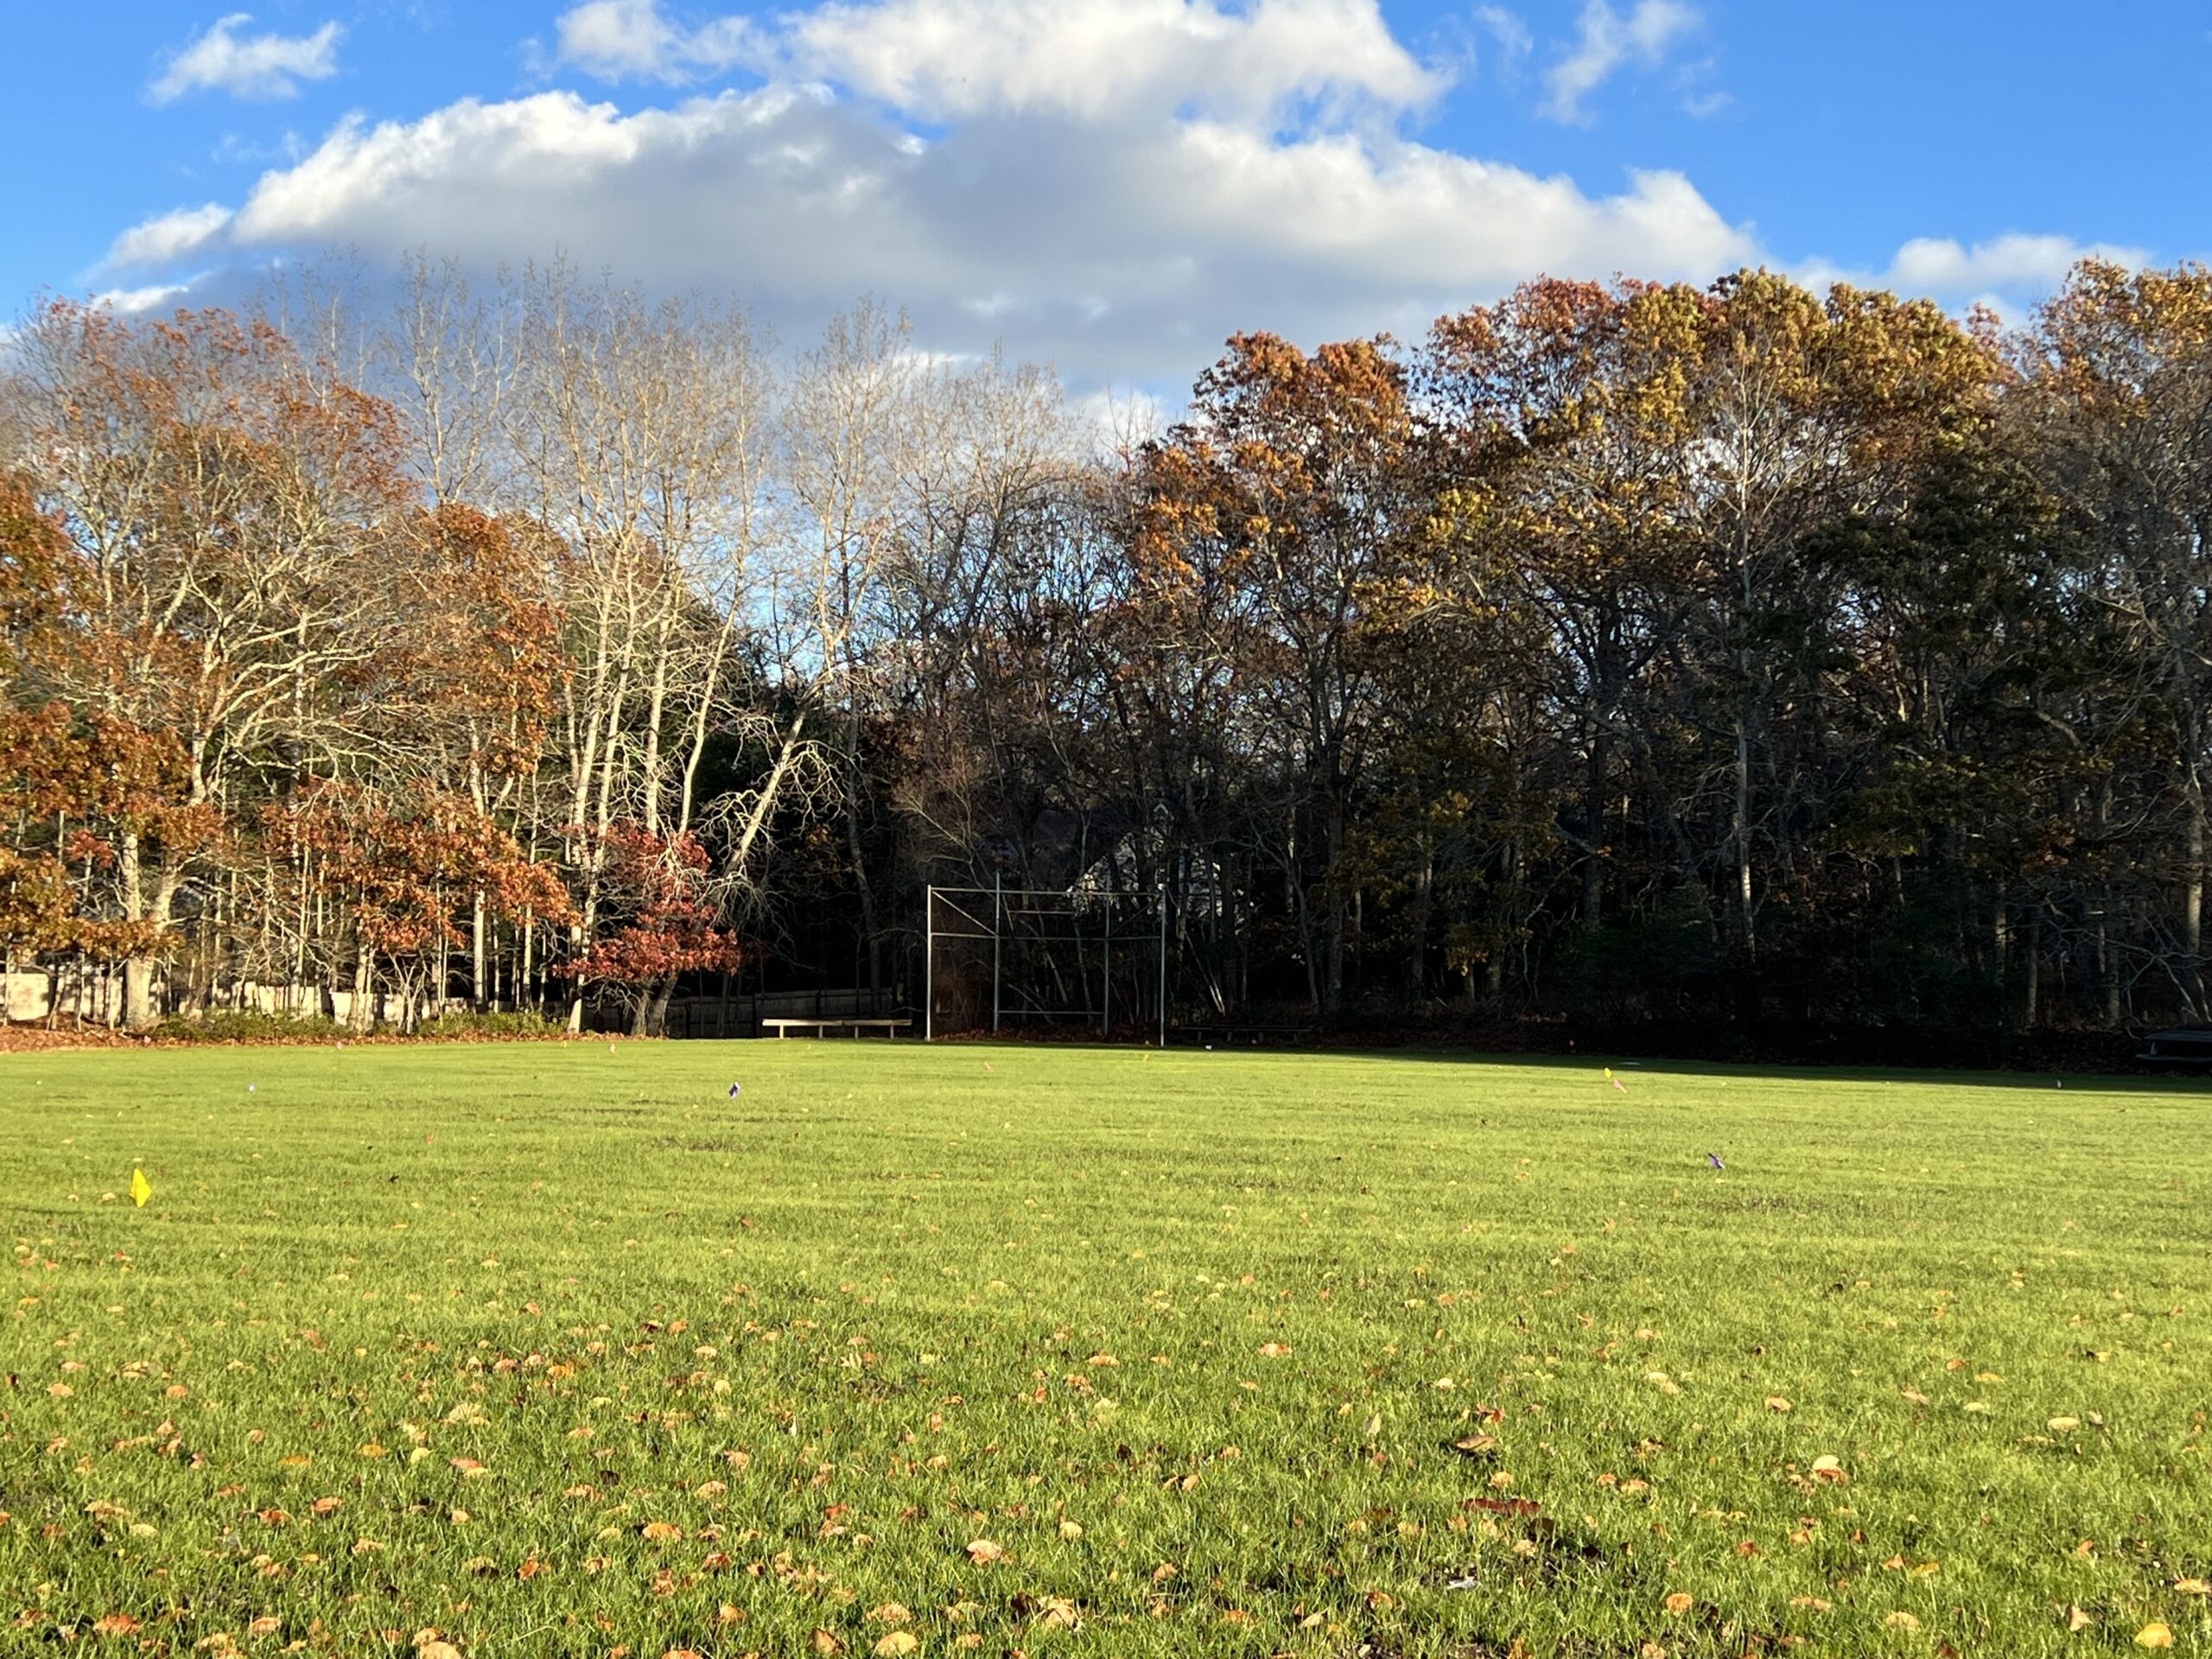 The organic grass field at the Bridgehampton Child Care and Recreation Center was a collaborative effort between several different landscapers and stakeholders in the community, committed to environmentally friendly and sustainable practices.